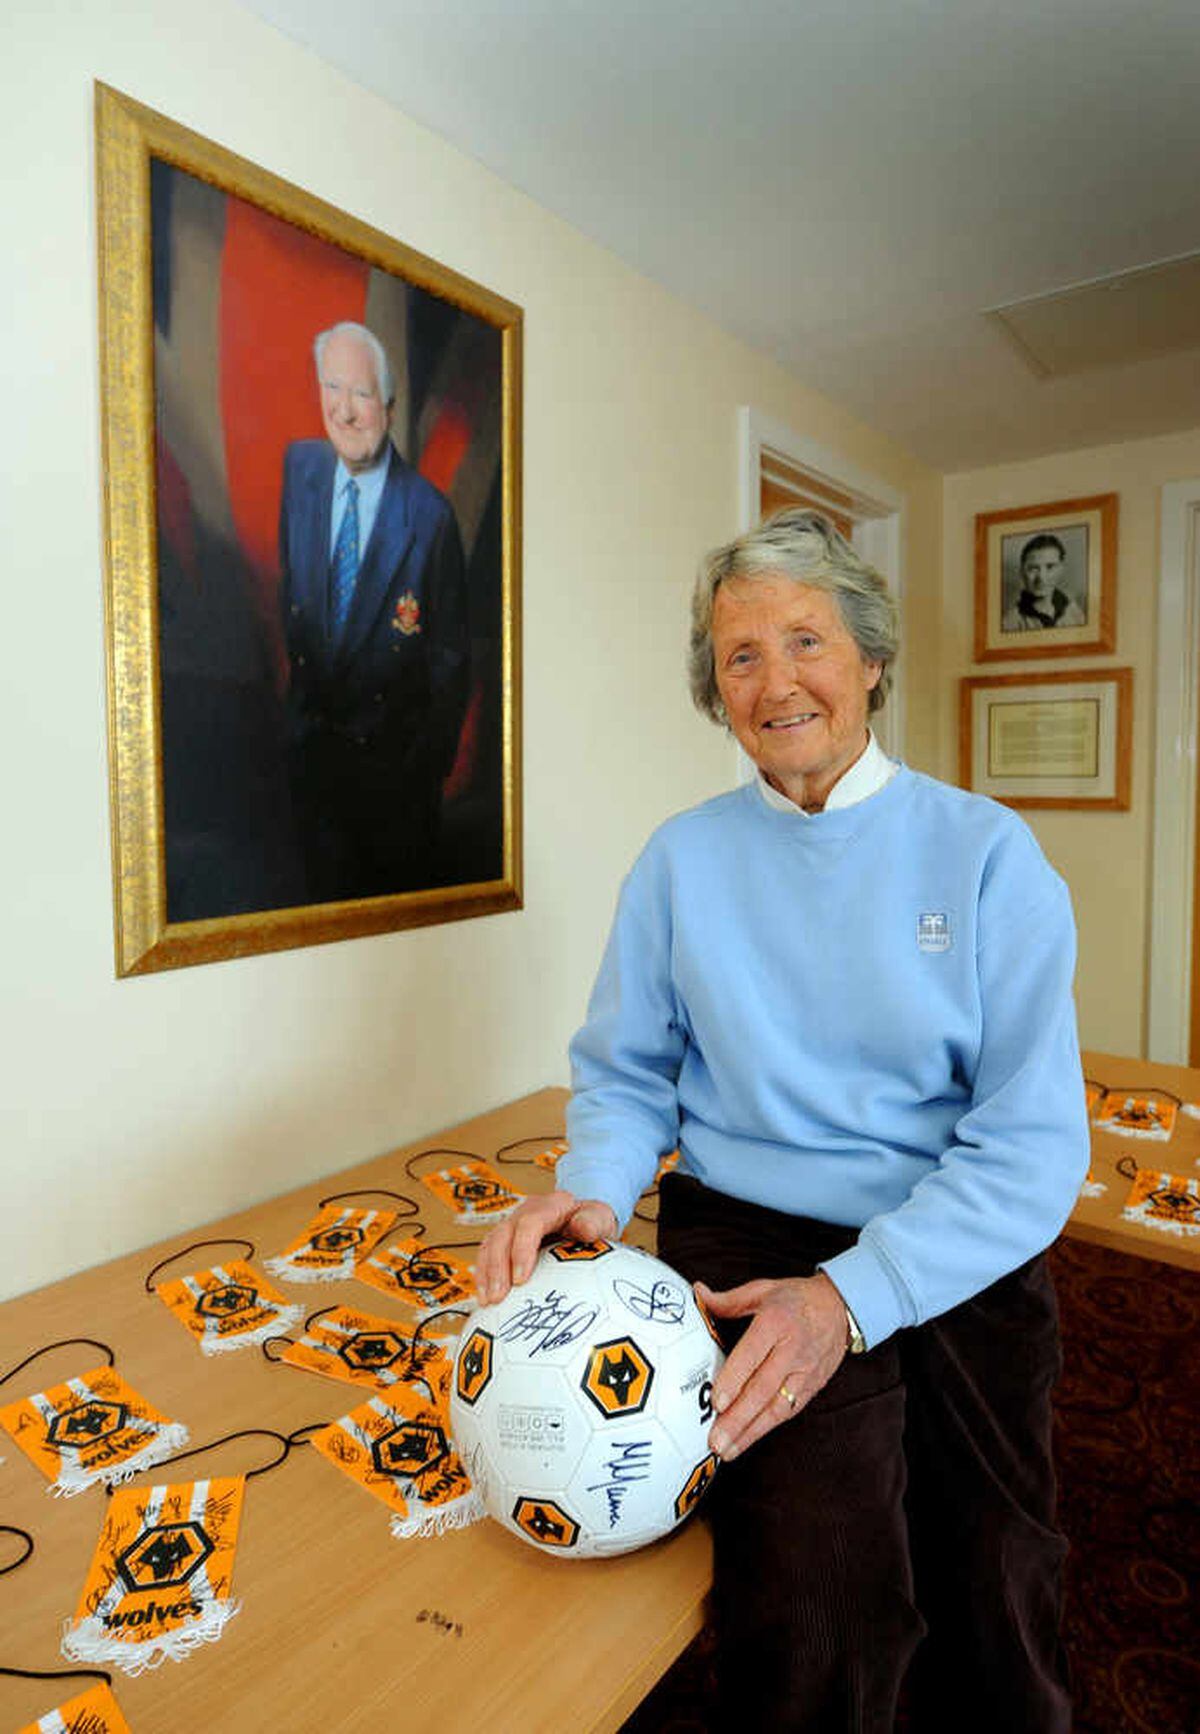 Rachael Heyhoe-Flint next to a portrait of her friend Sir Jack Hayward, at the Wolves training ground.